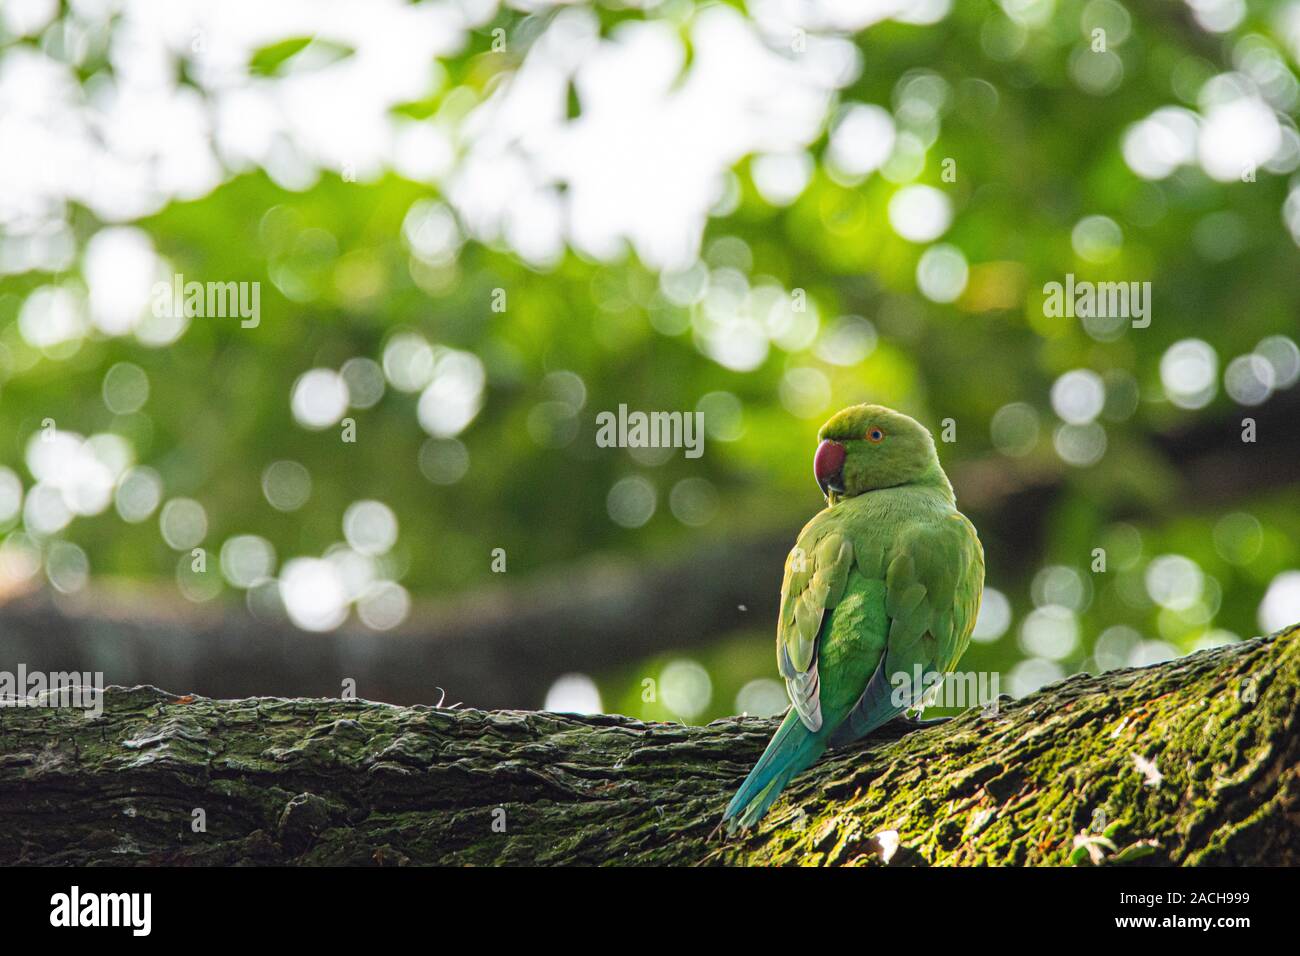 The rose-ringed parakeet, also known as the ring-necked parakeet, is a medium-sized parrot in the genus Psittacula, of the family Psittacidae. Stock Photo